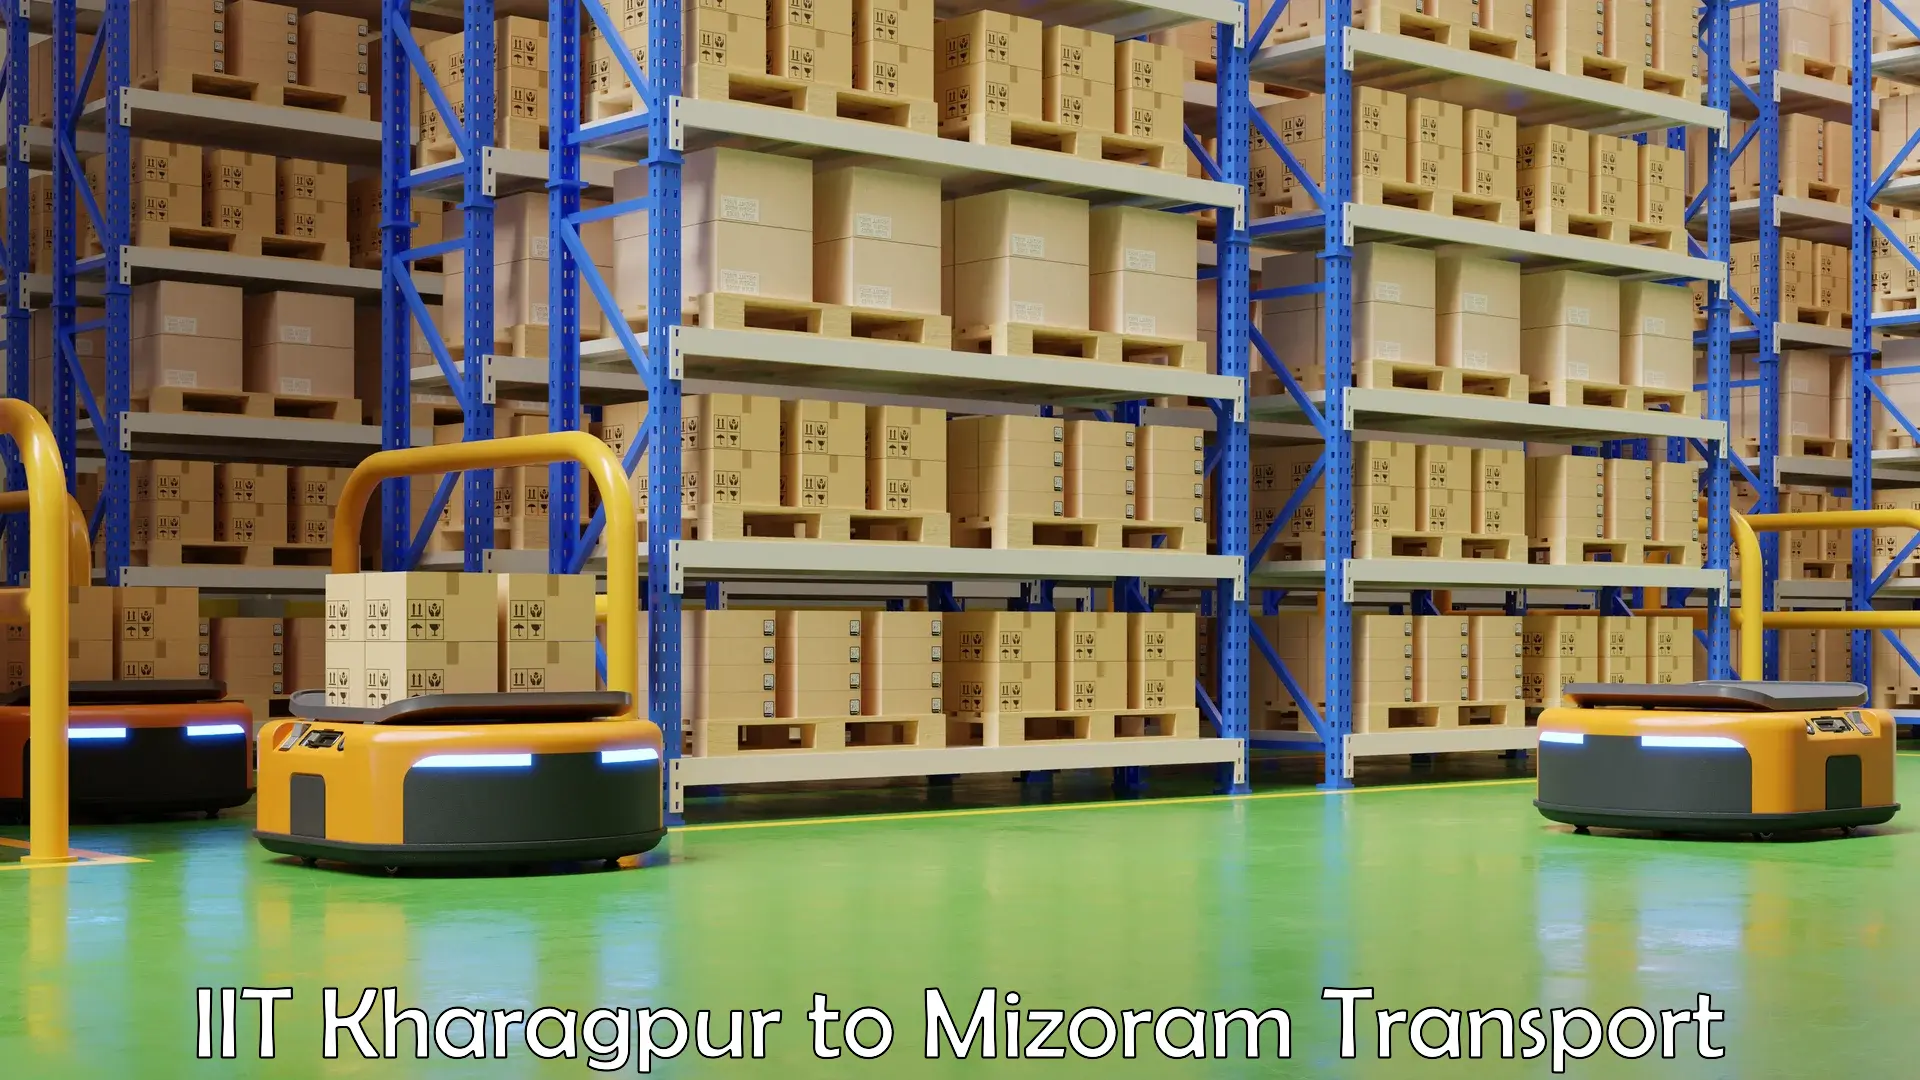 Delivery service IIT Kharagpur to Mizoram